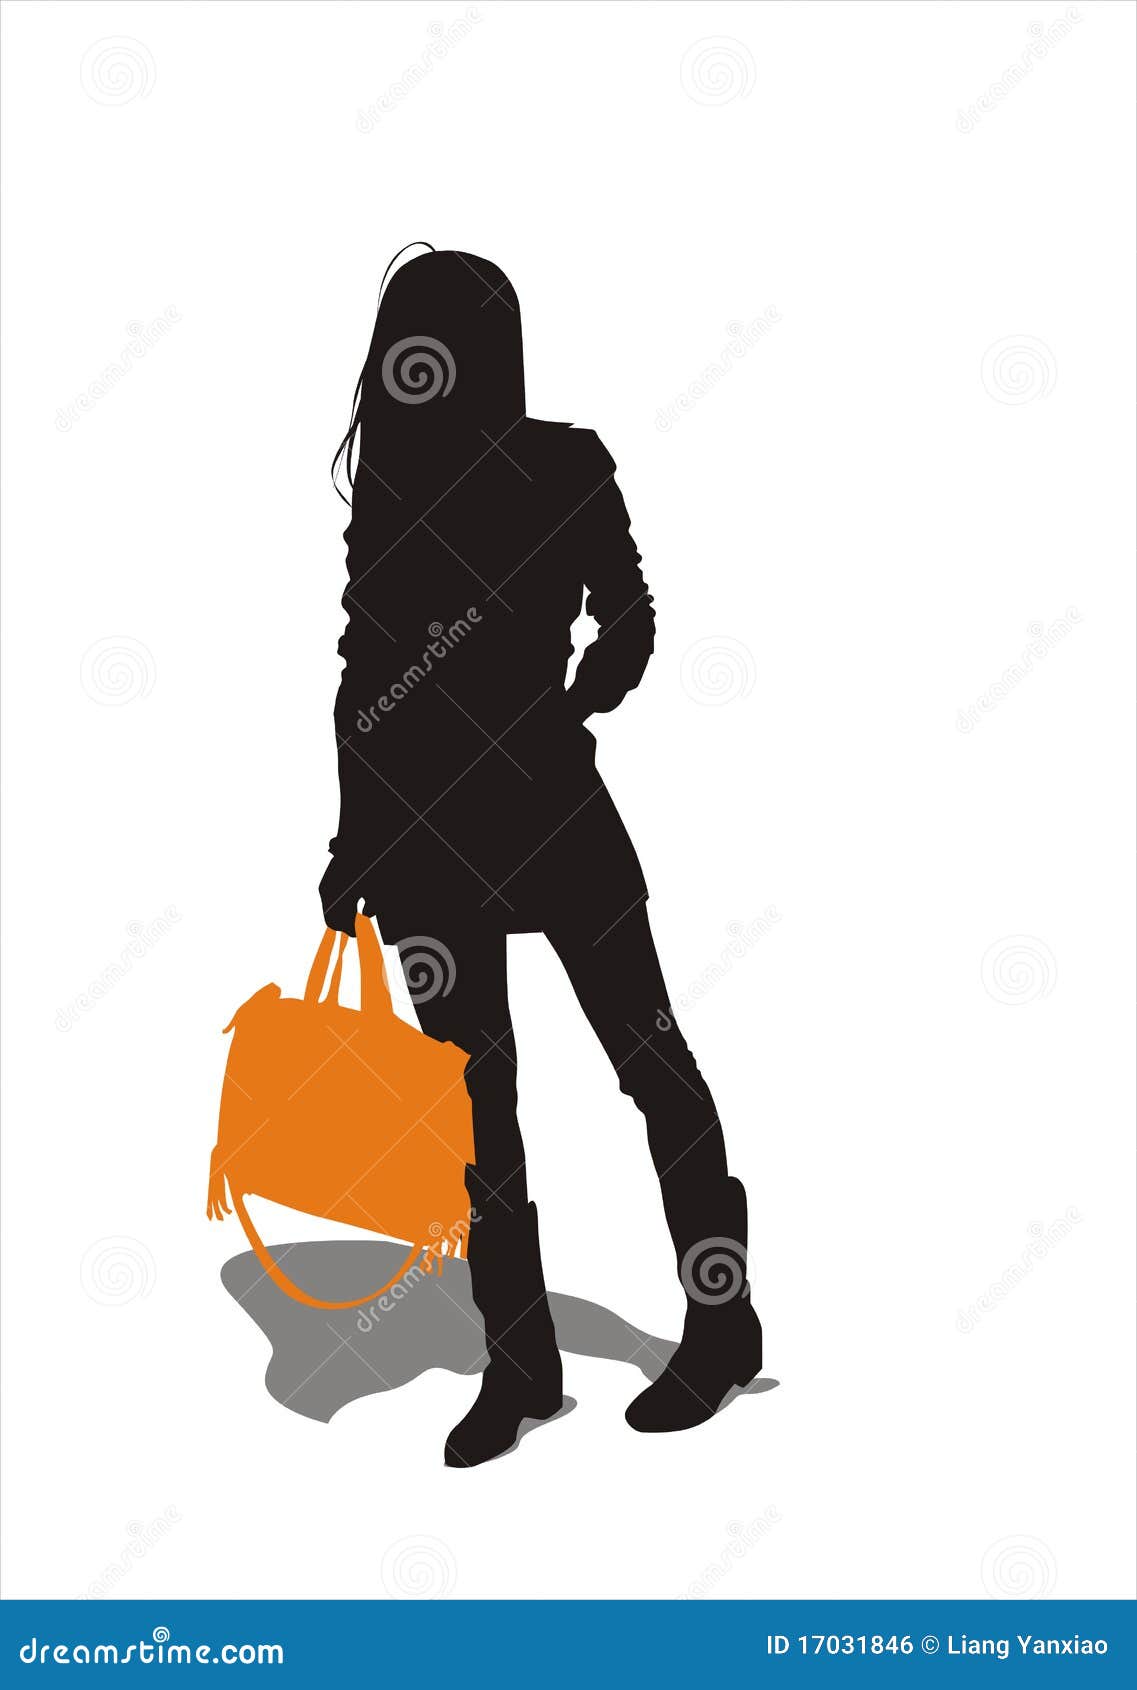 The Girl Carried A Handbag Stock Vector Illustration Of Background 17031846